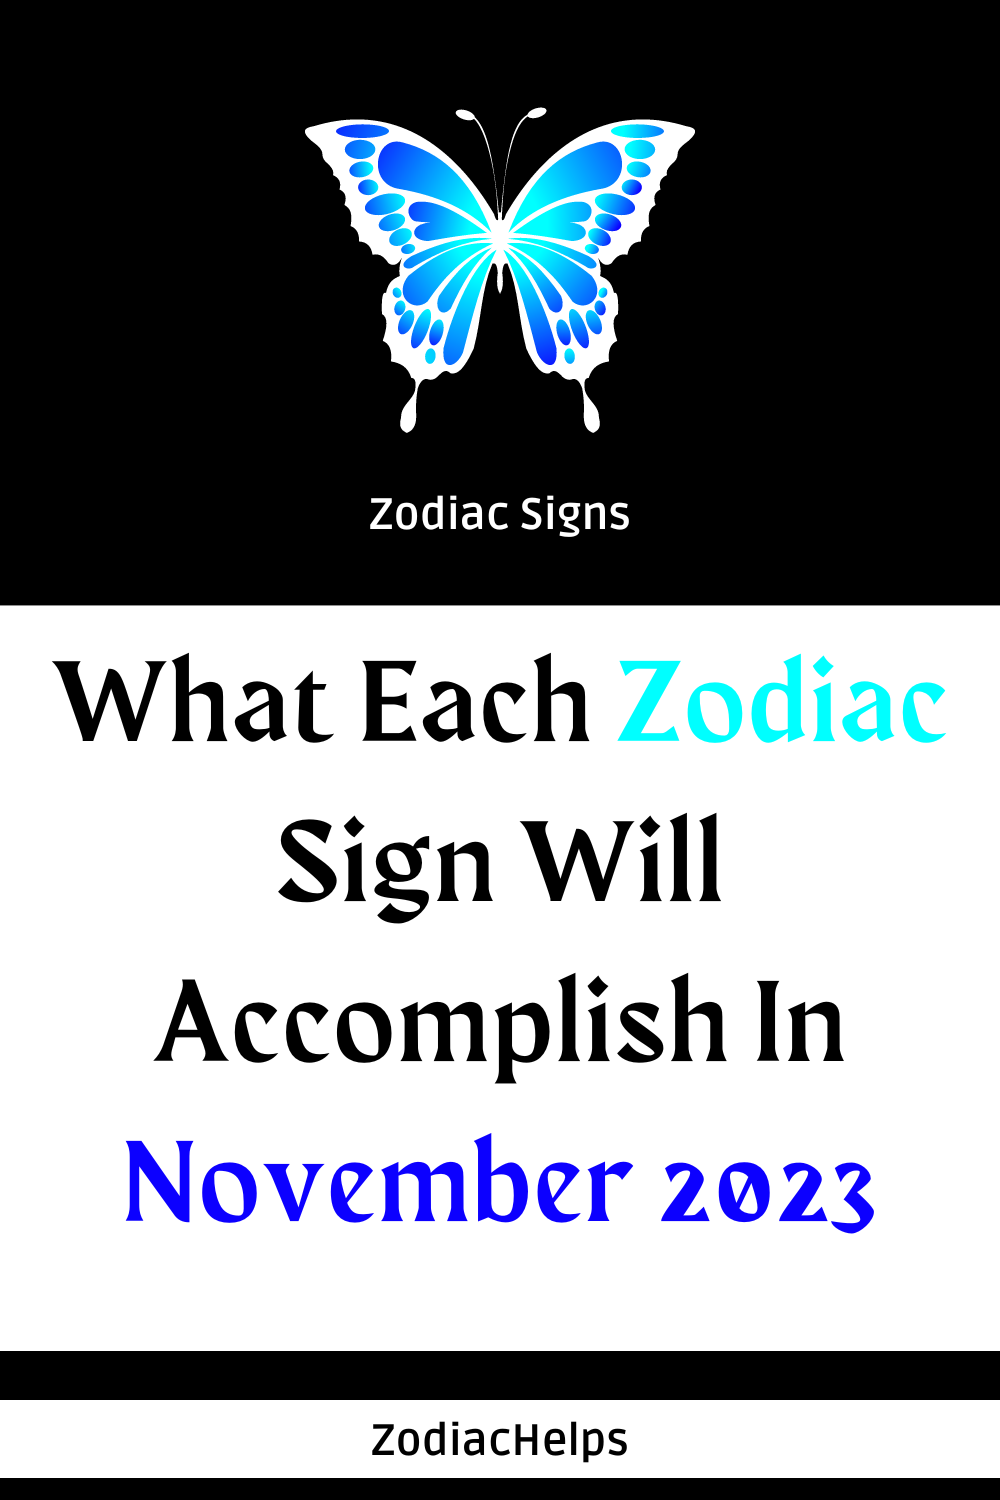 What Each Zodiac Sign Will Accomplish In November 2023